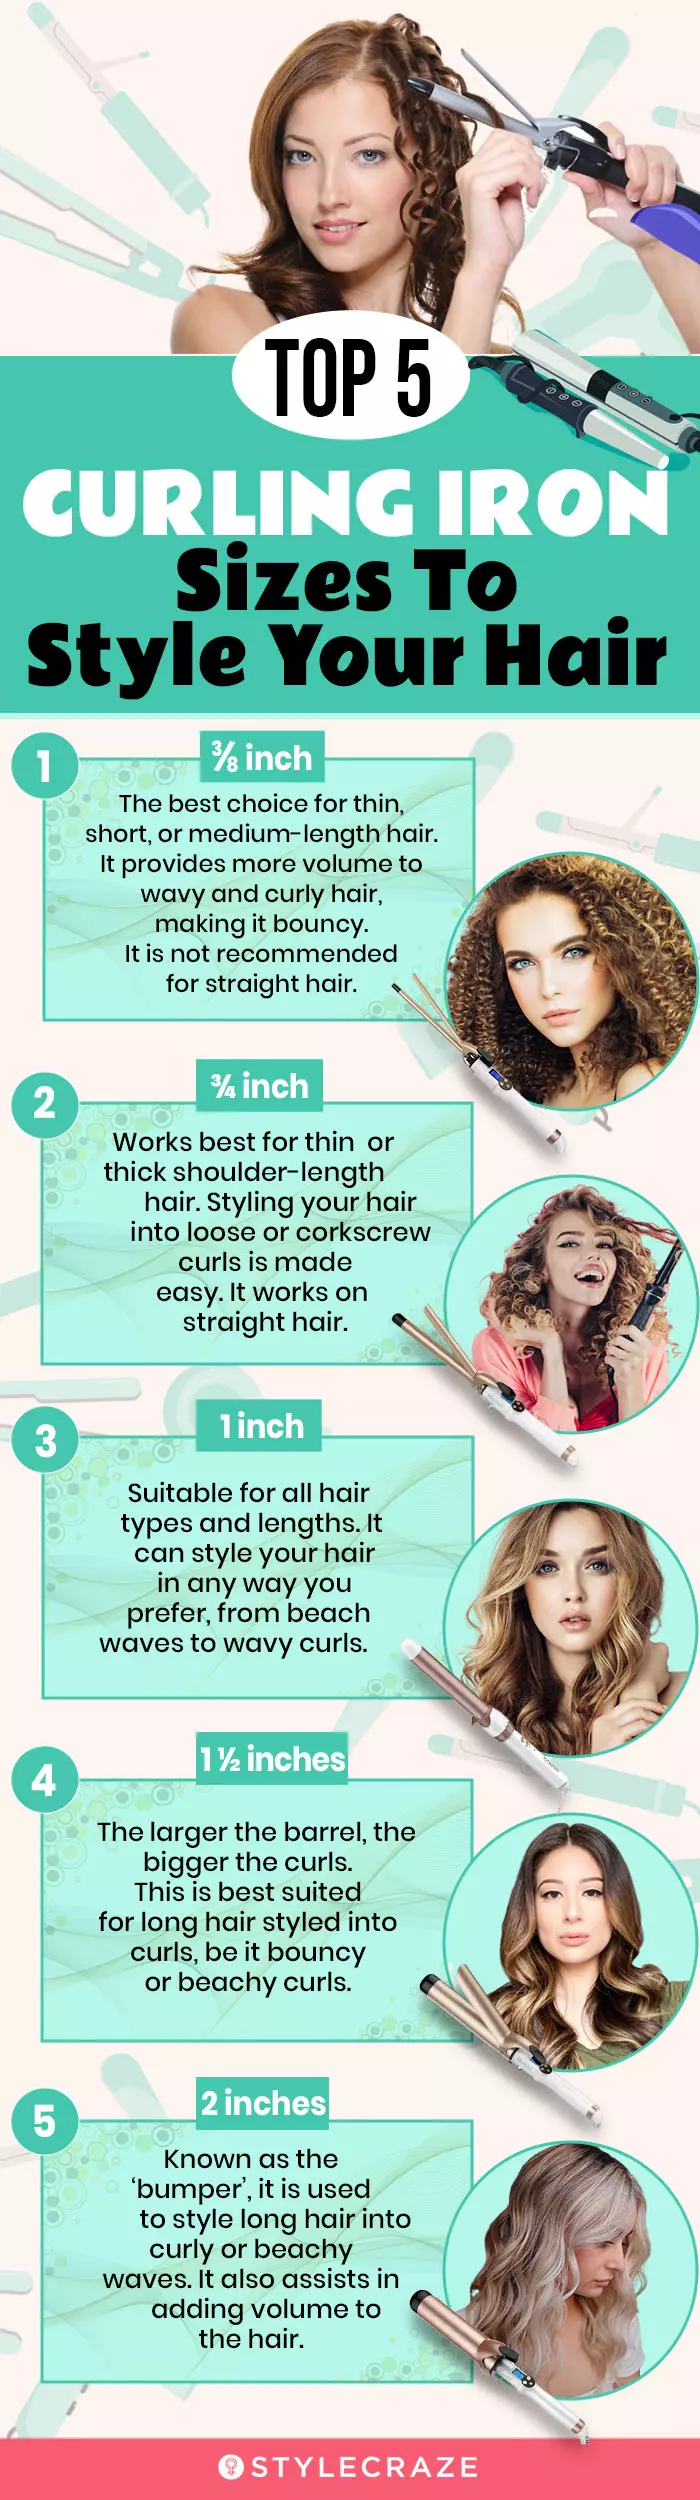 top 5 curling iron sizes to style your hair(infographic)